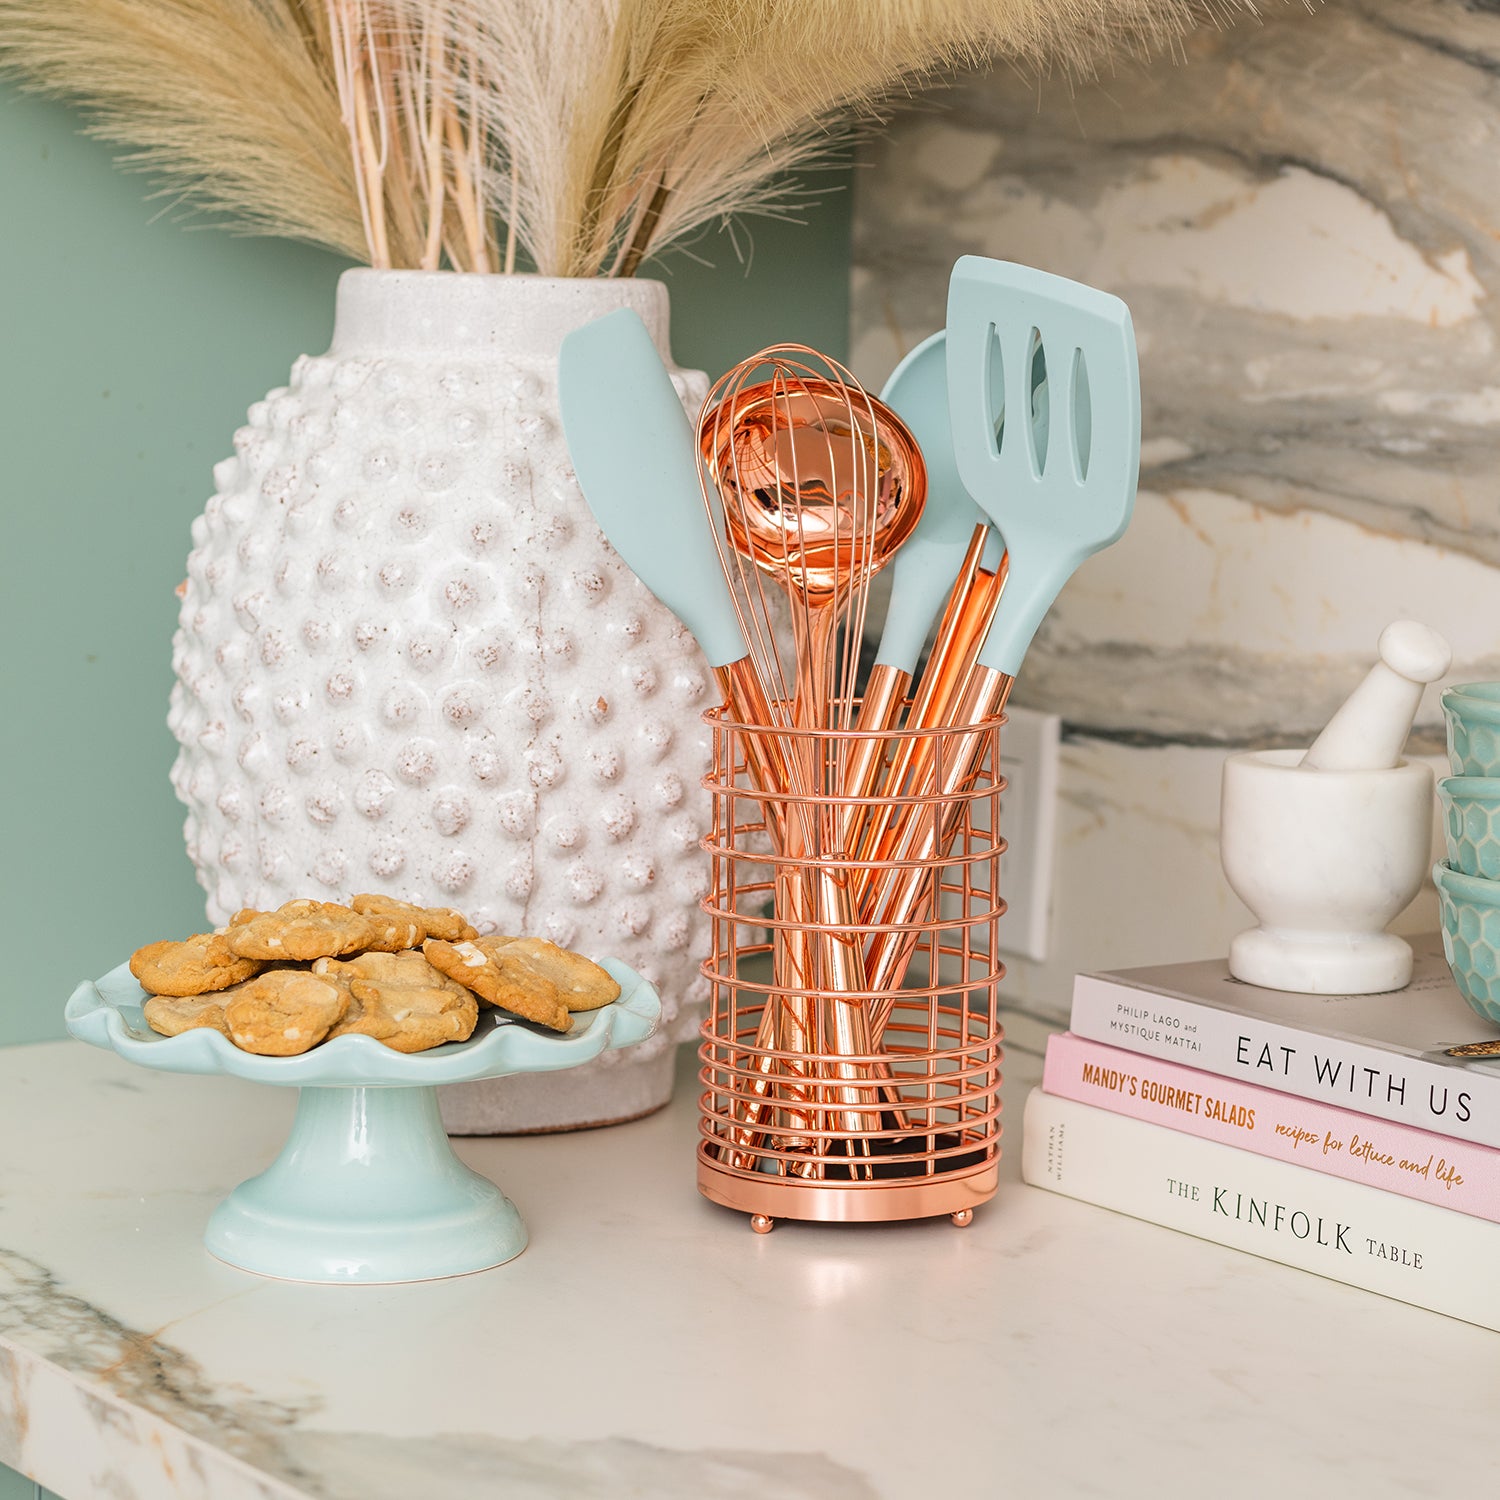 Copper and Teal Kitchen Utensils Set with Holder - Styled Settings